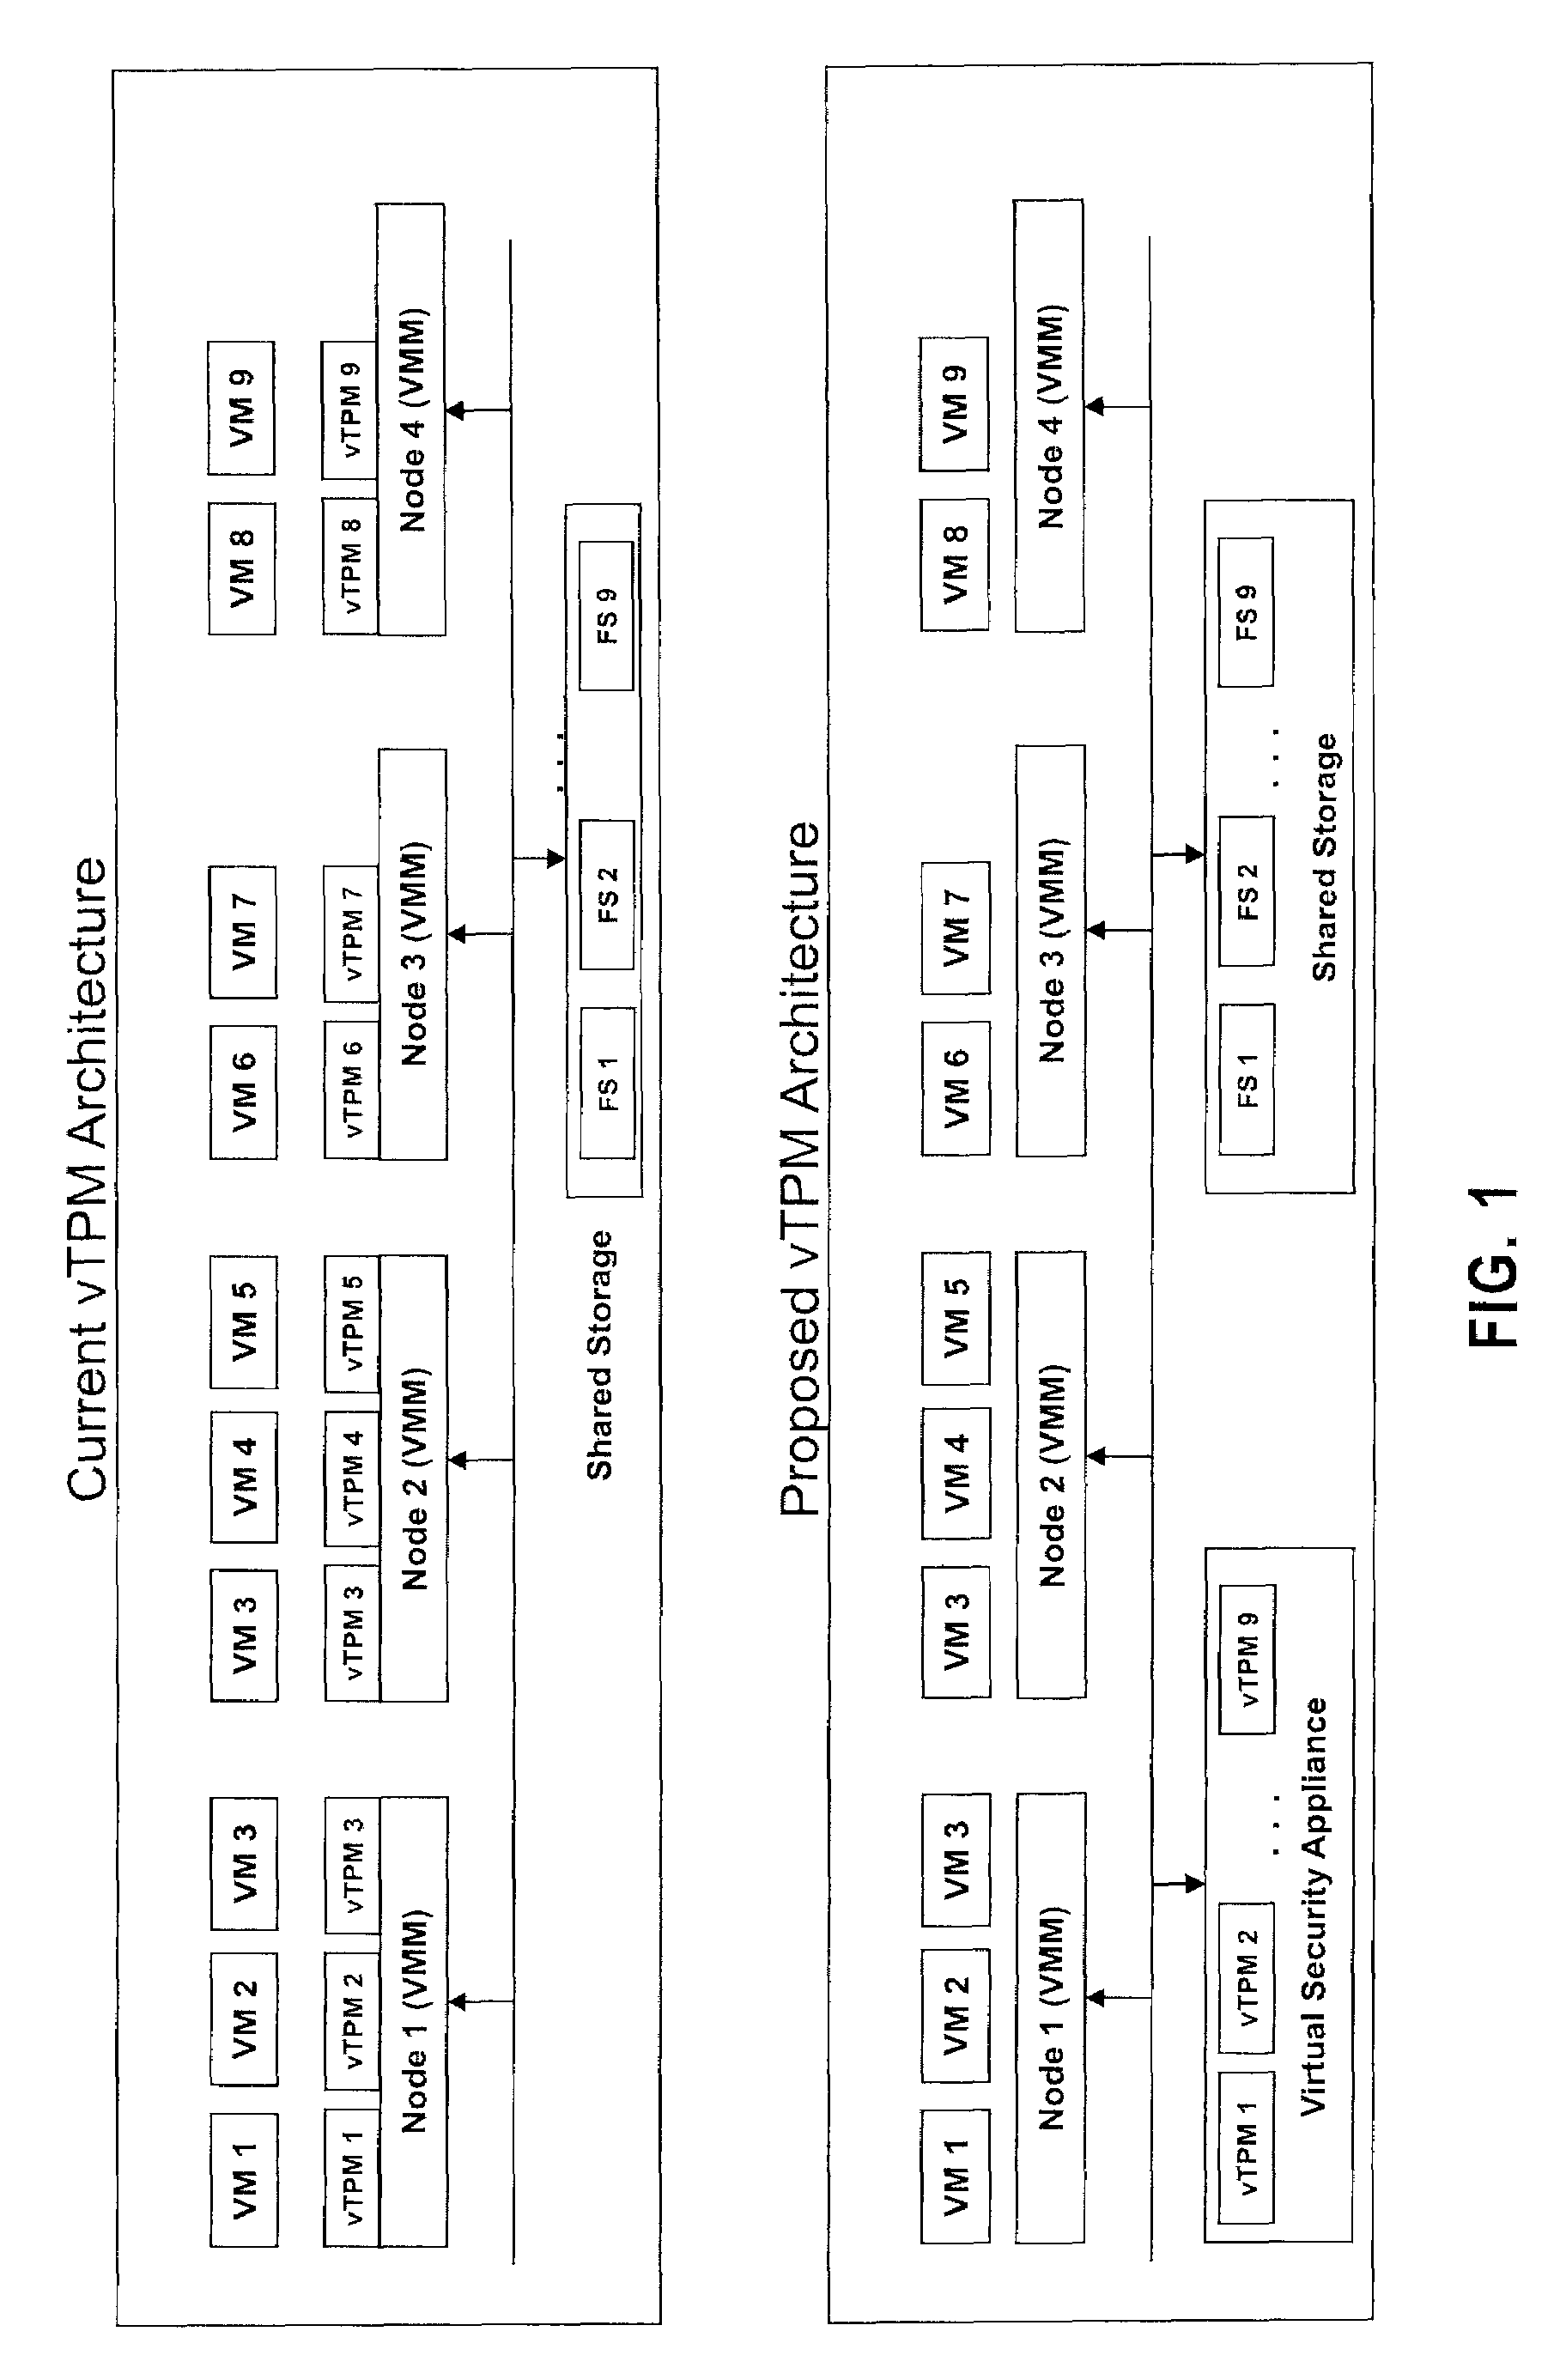 Systems, methods and computer program products for high availability enhancements of virtual security module servers